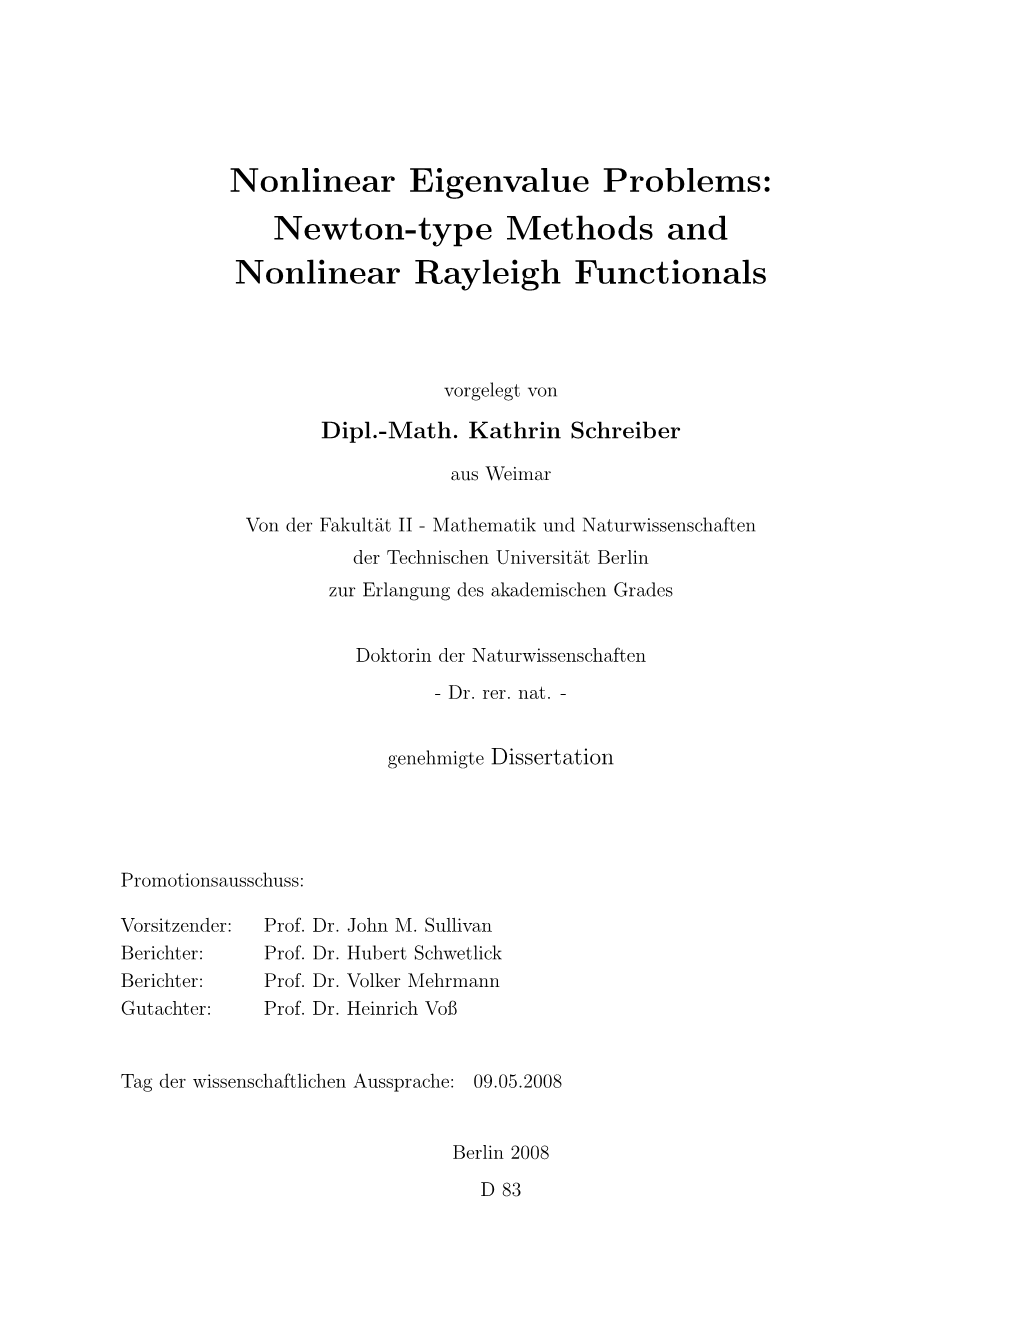 Nonlinear Eigenvalue Problems: Newton-Type Methods and Nonlinear Rayleigh Functionals